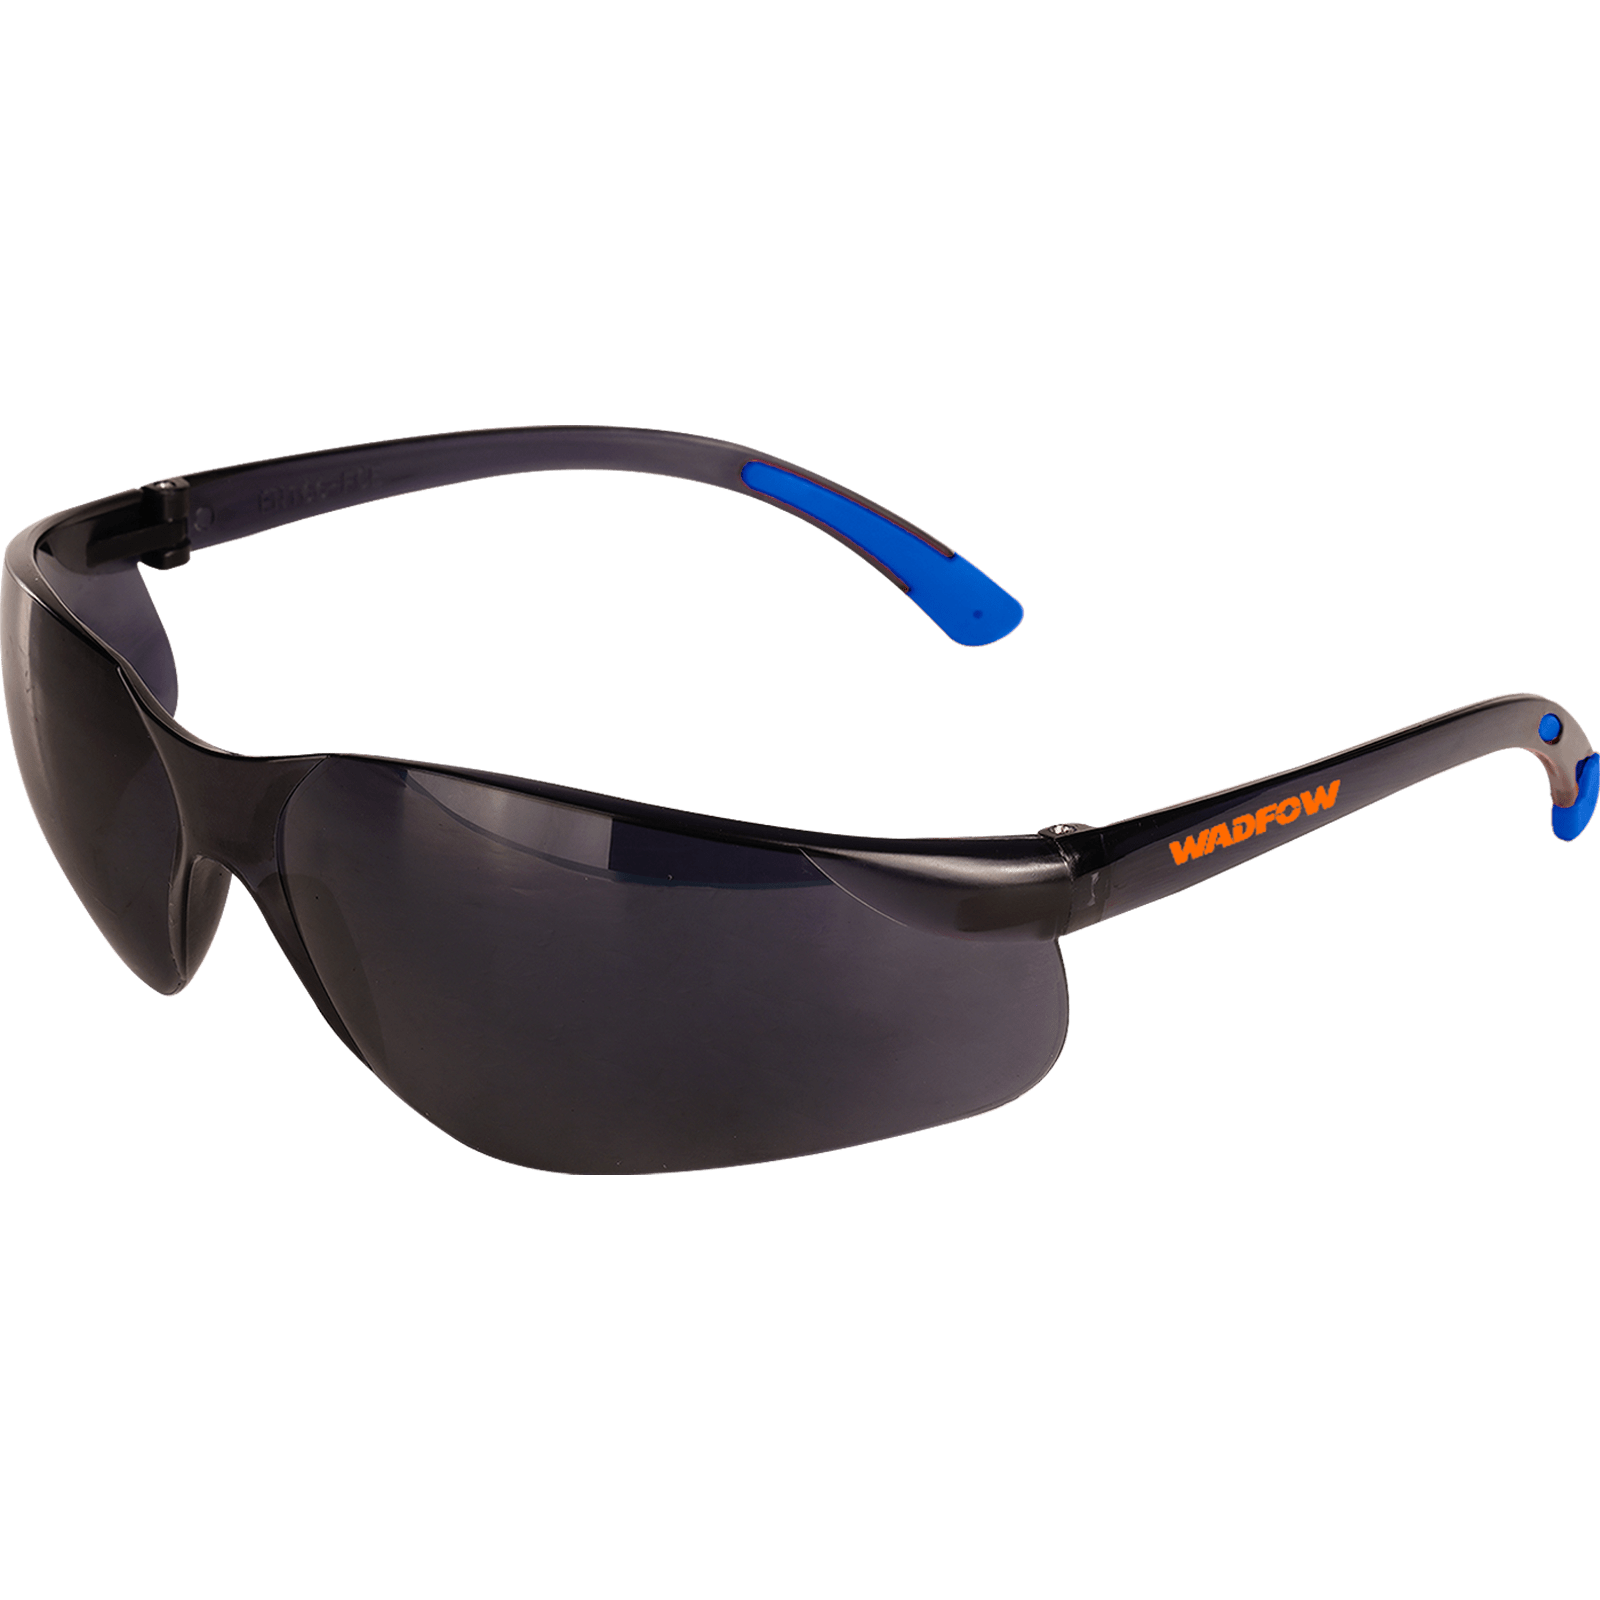 Buy Wadfow Safety Goggles (WSG3808) Online in Accra, Ghana | Supply Master Eye Protection & Safety Glasses Buy Tools hardware Building materials